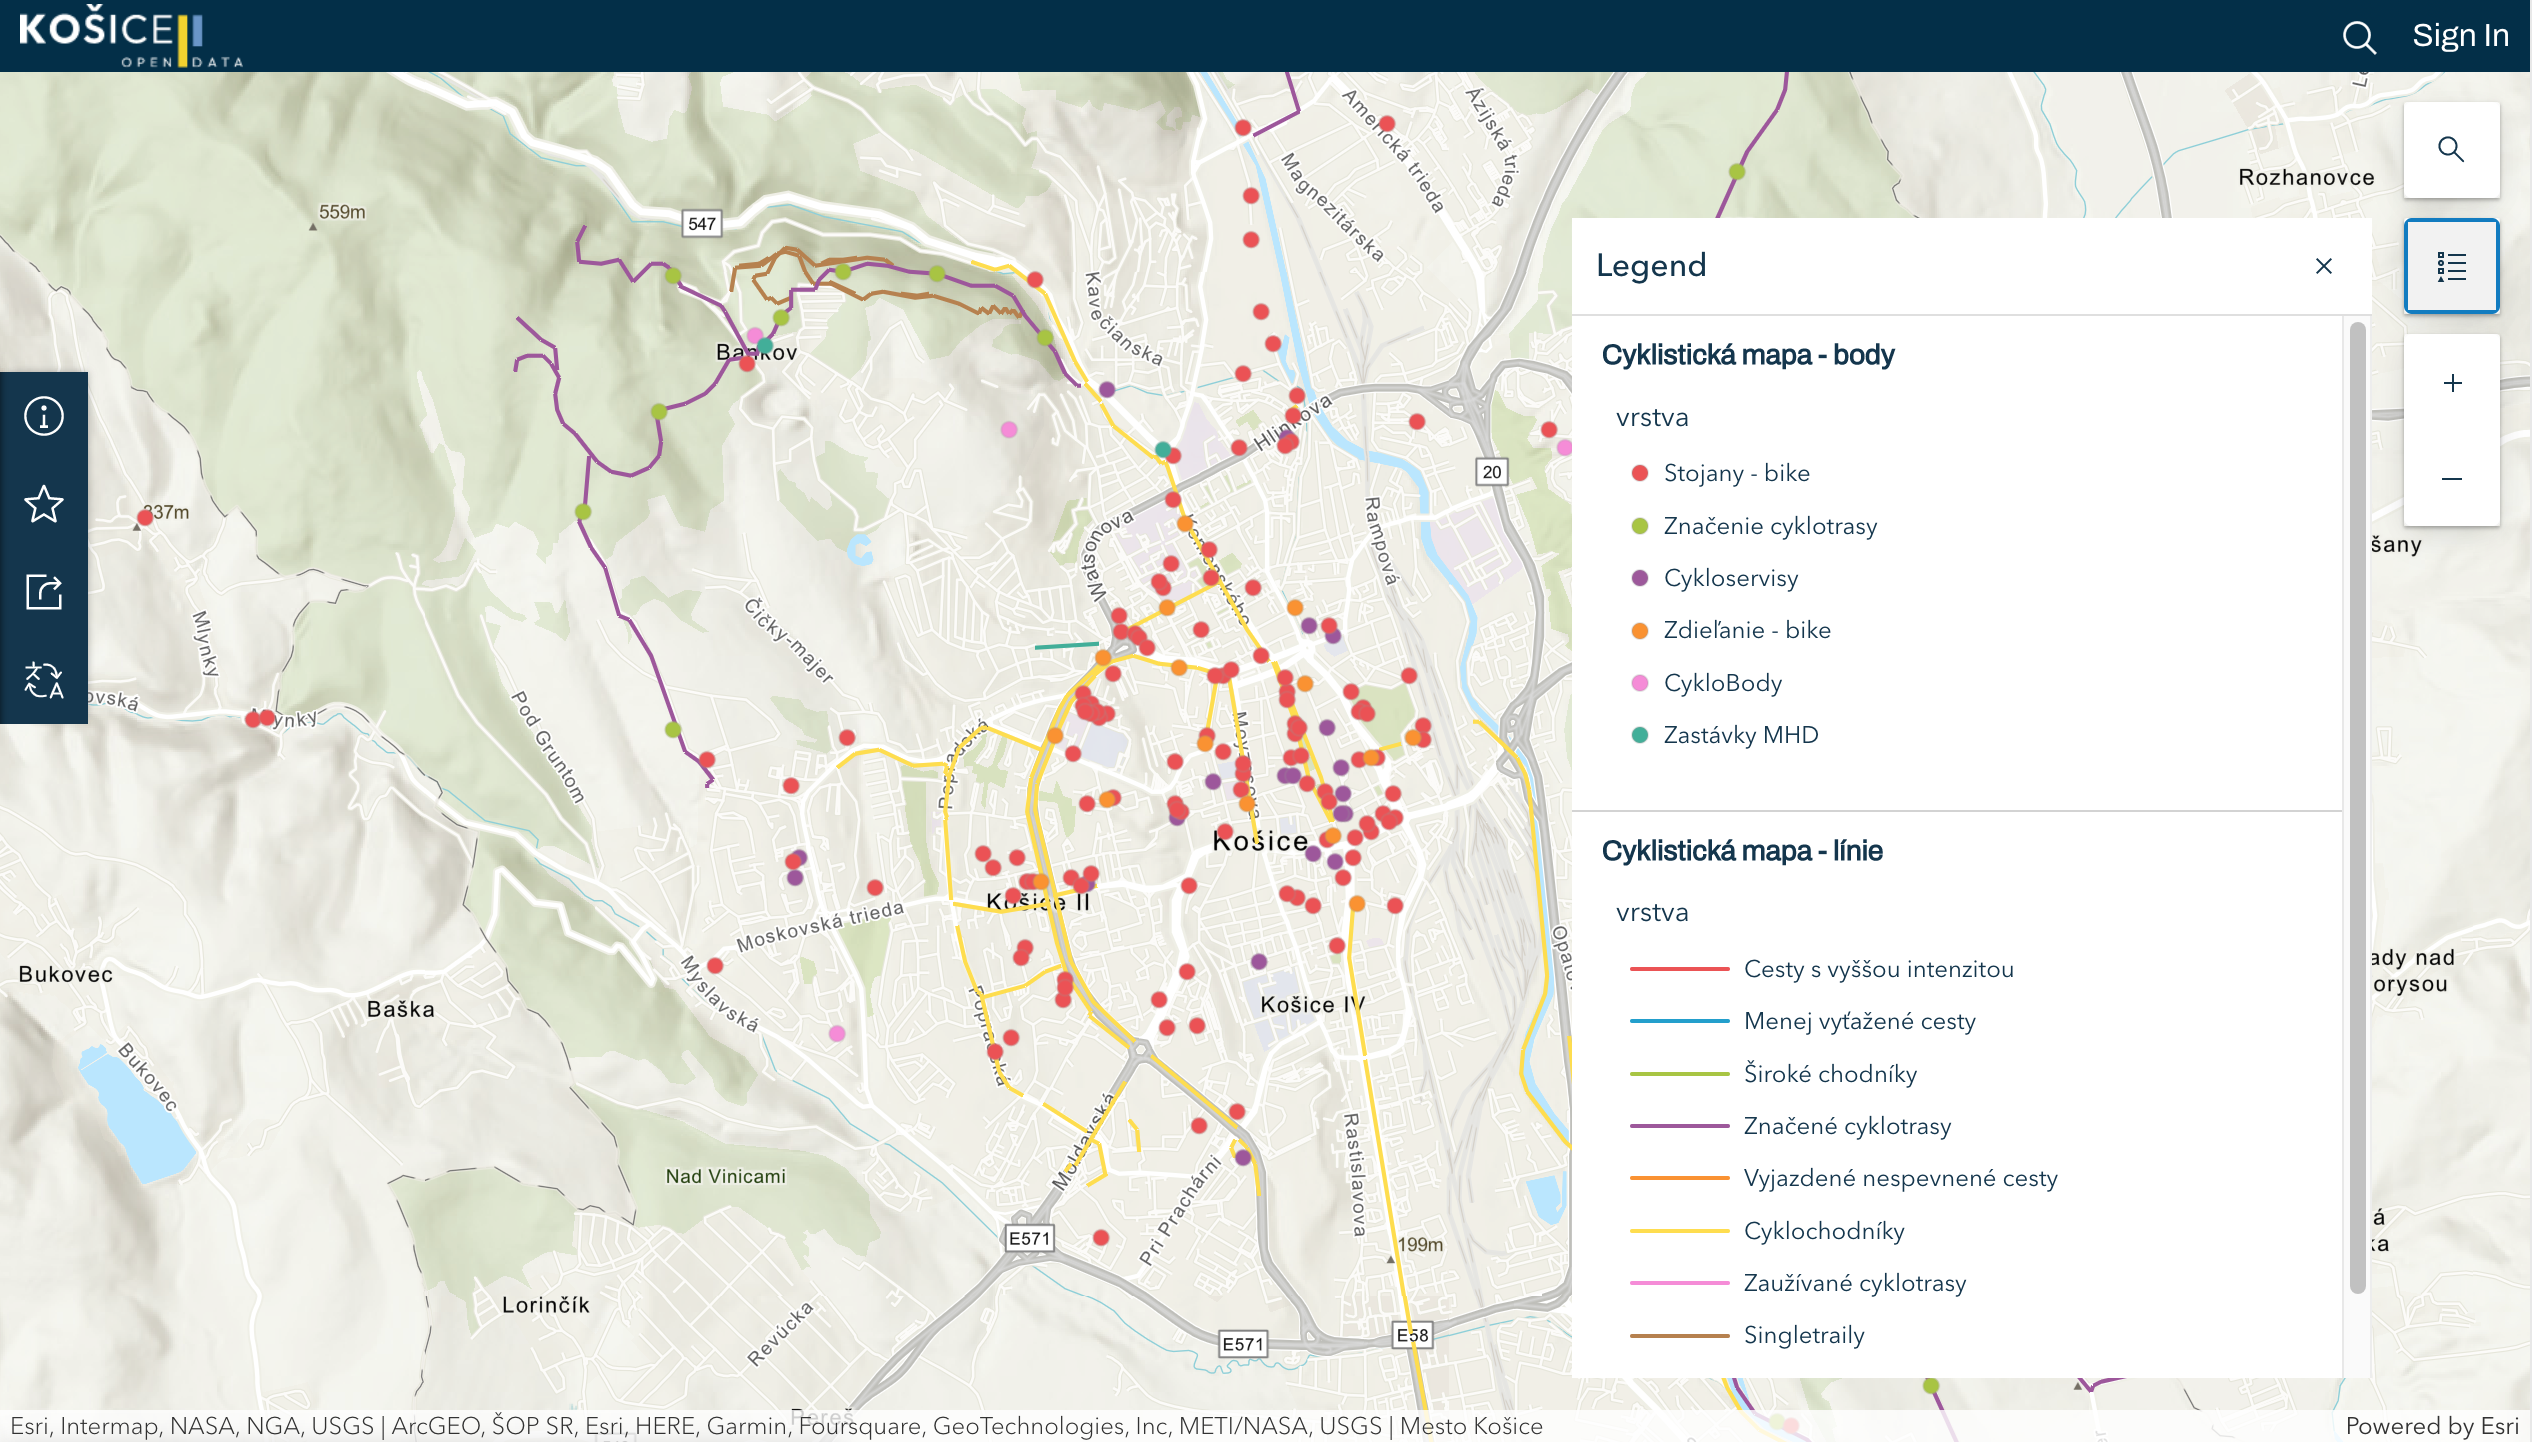 Map of cycling network and infrastructure in Kosice, source: Open Data Kosice